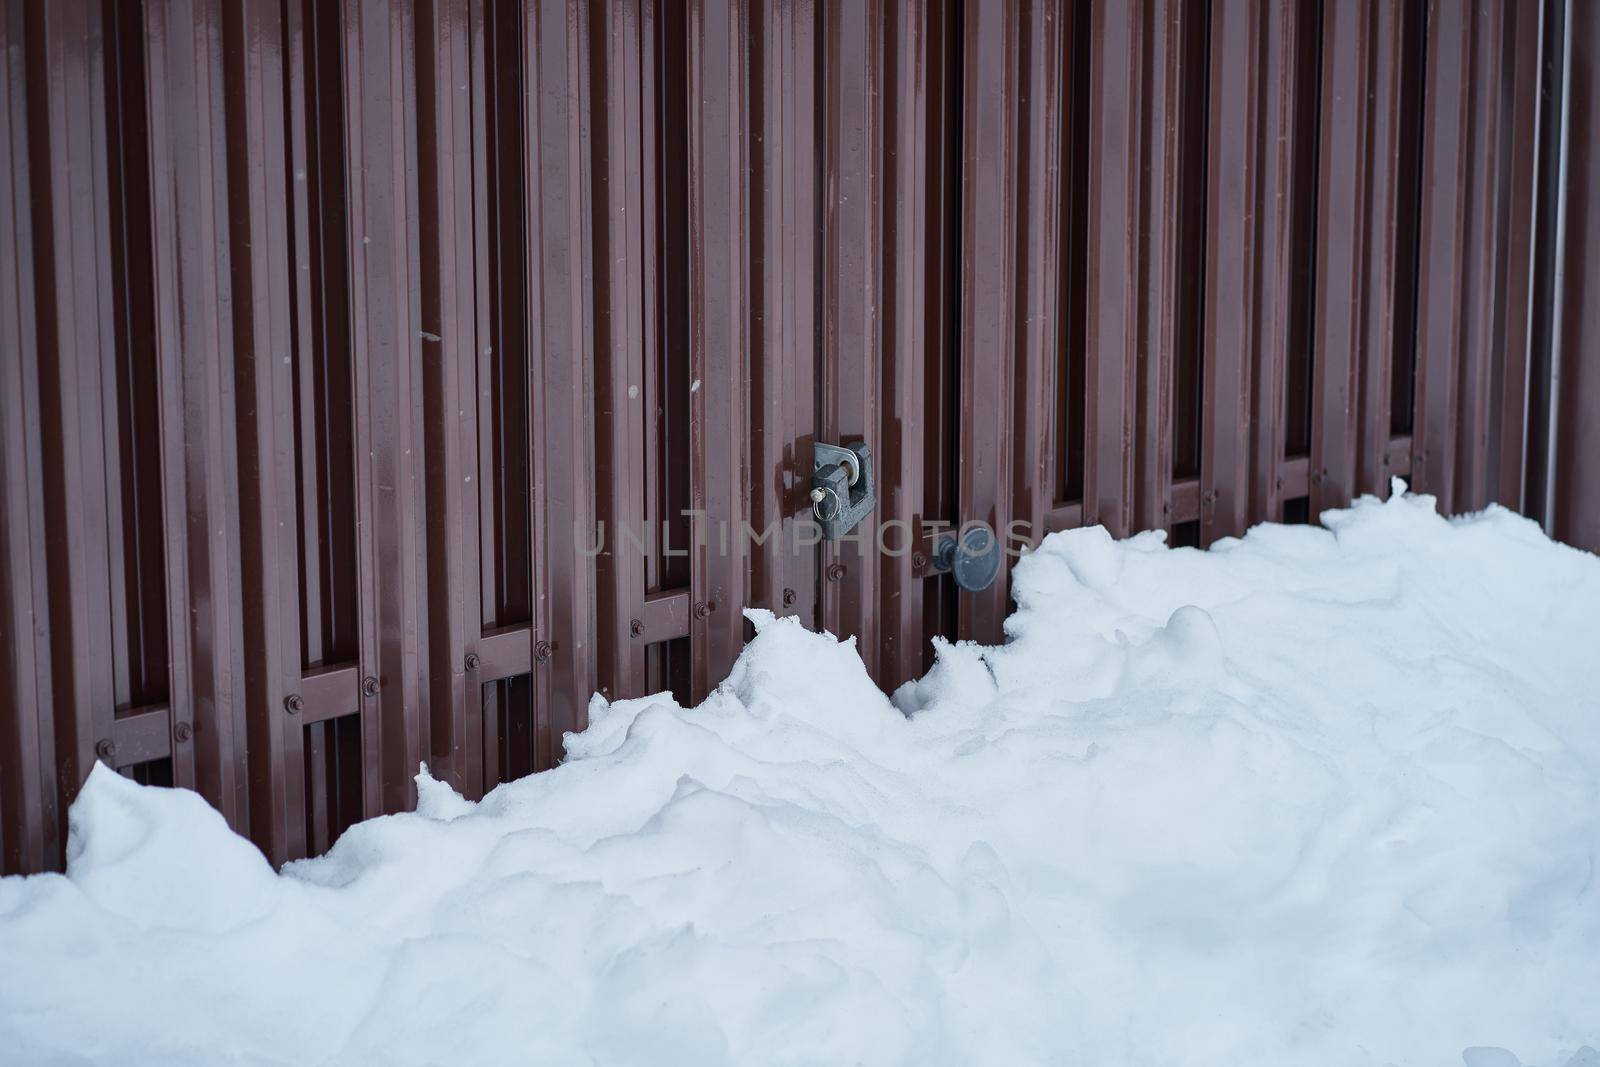 rural scene of countryside, steel fence with lock and handle, bitter cold and a lot of snow